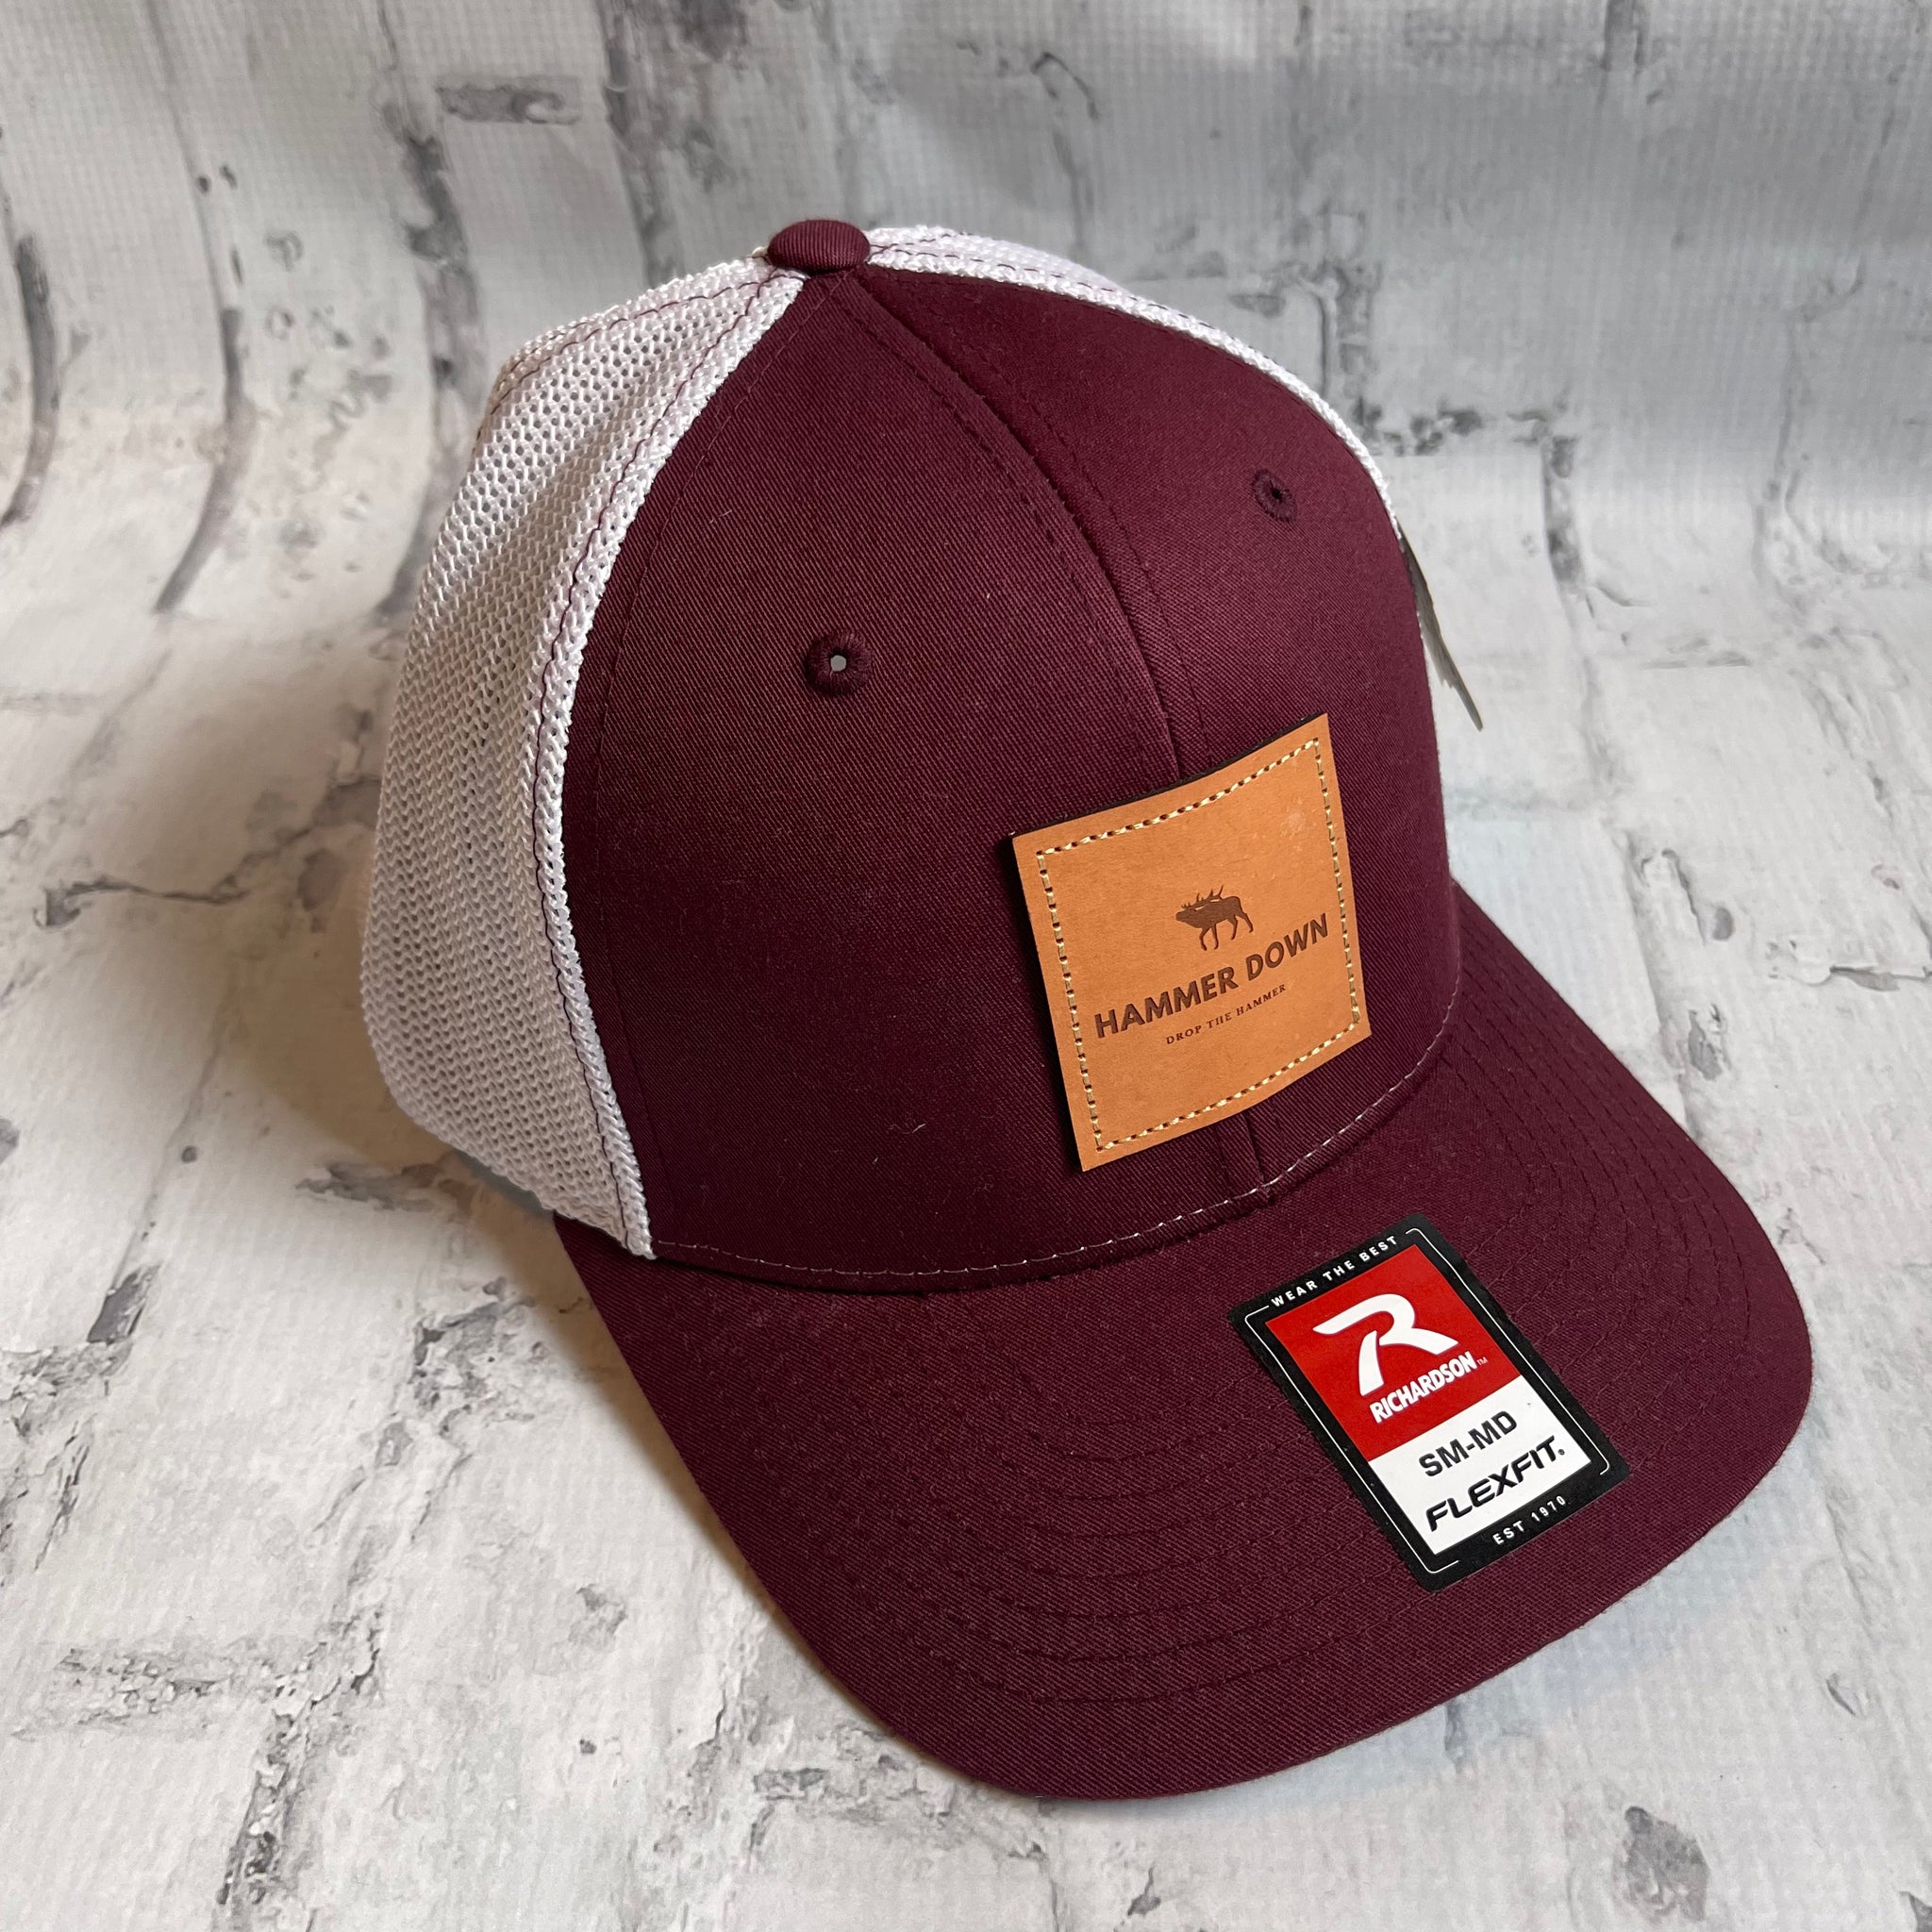 Hammer Down "Elk DTH" Flex Fit Hat - Maroon with Leather Patch - Southern Charm "Shop The Charm"